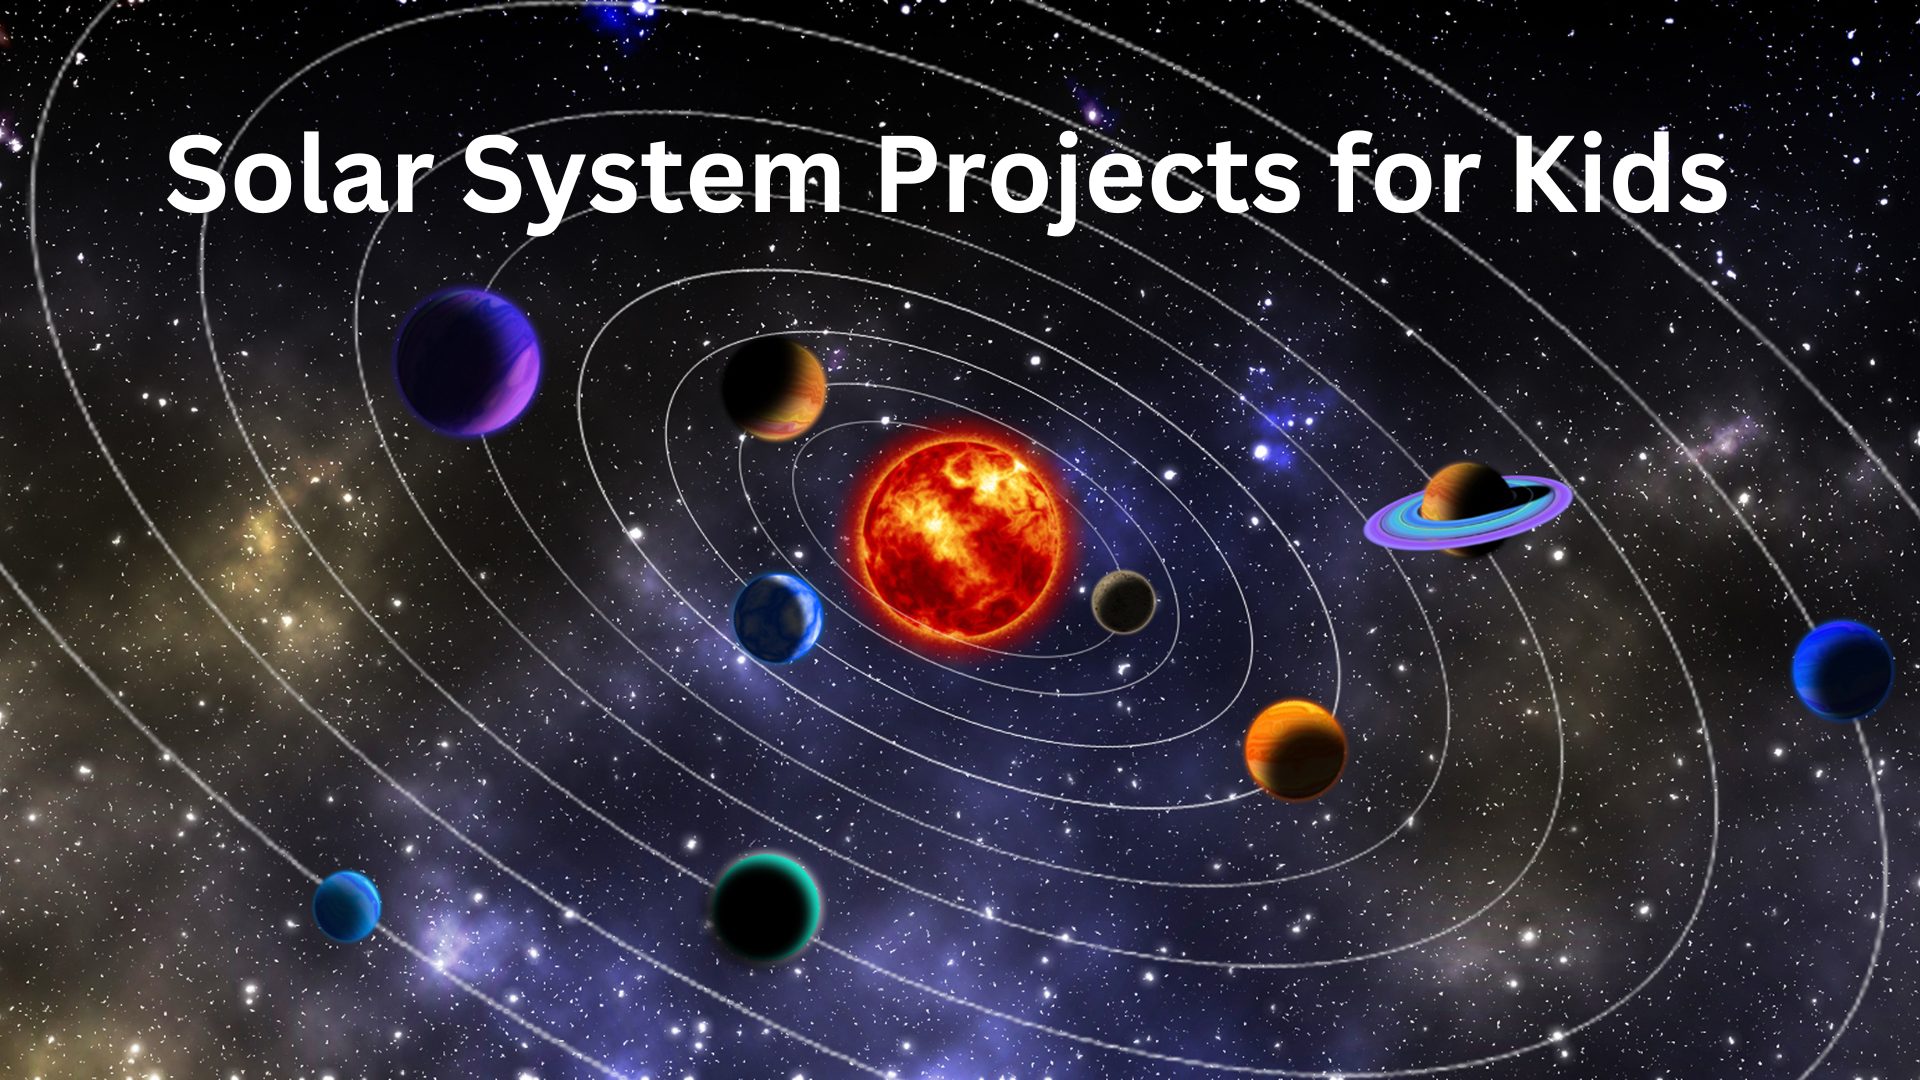 Solar System Projects for Kids - Global Student Network